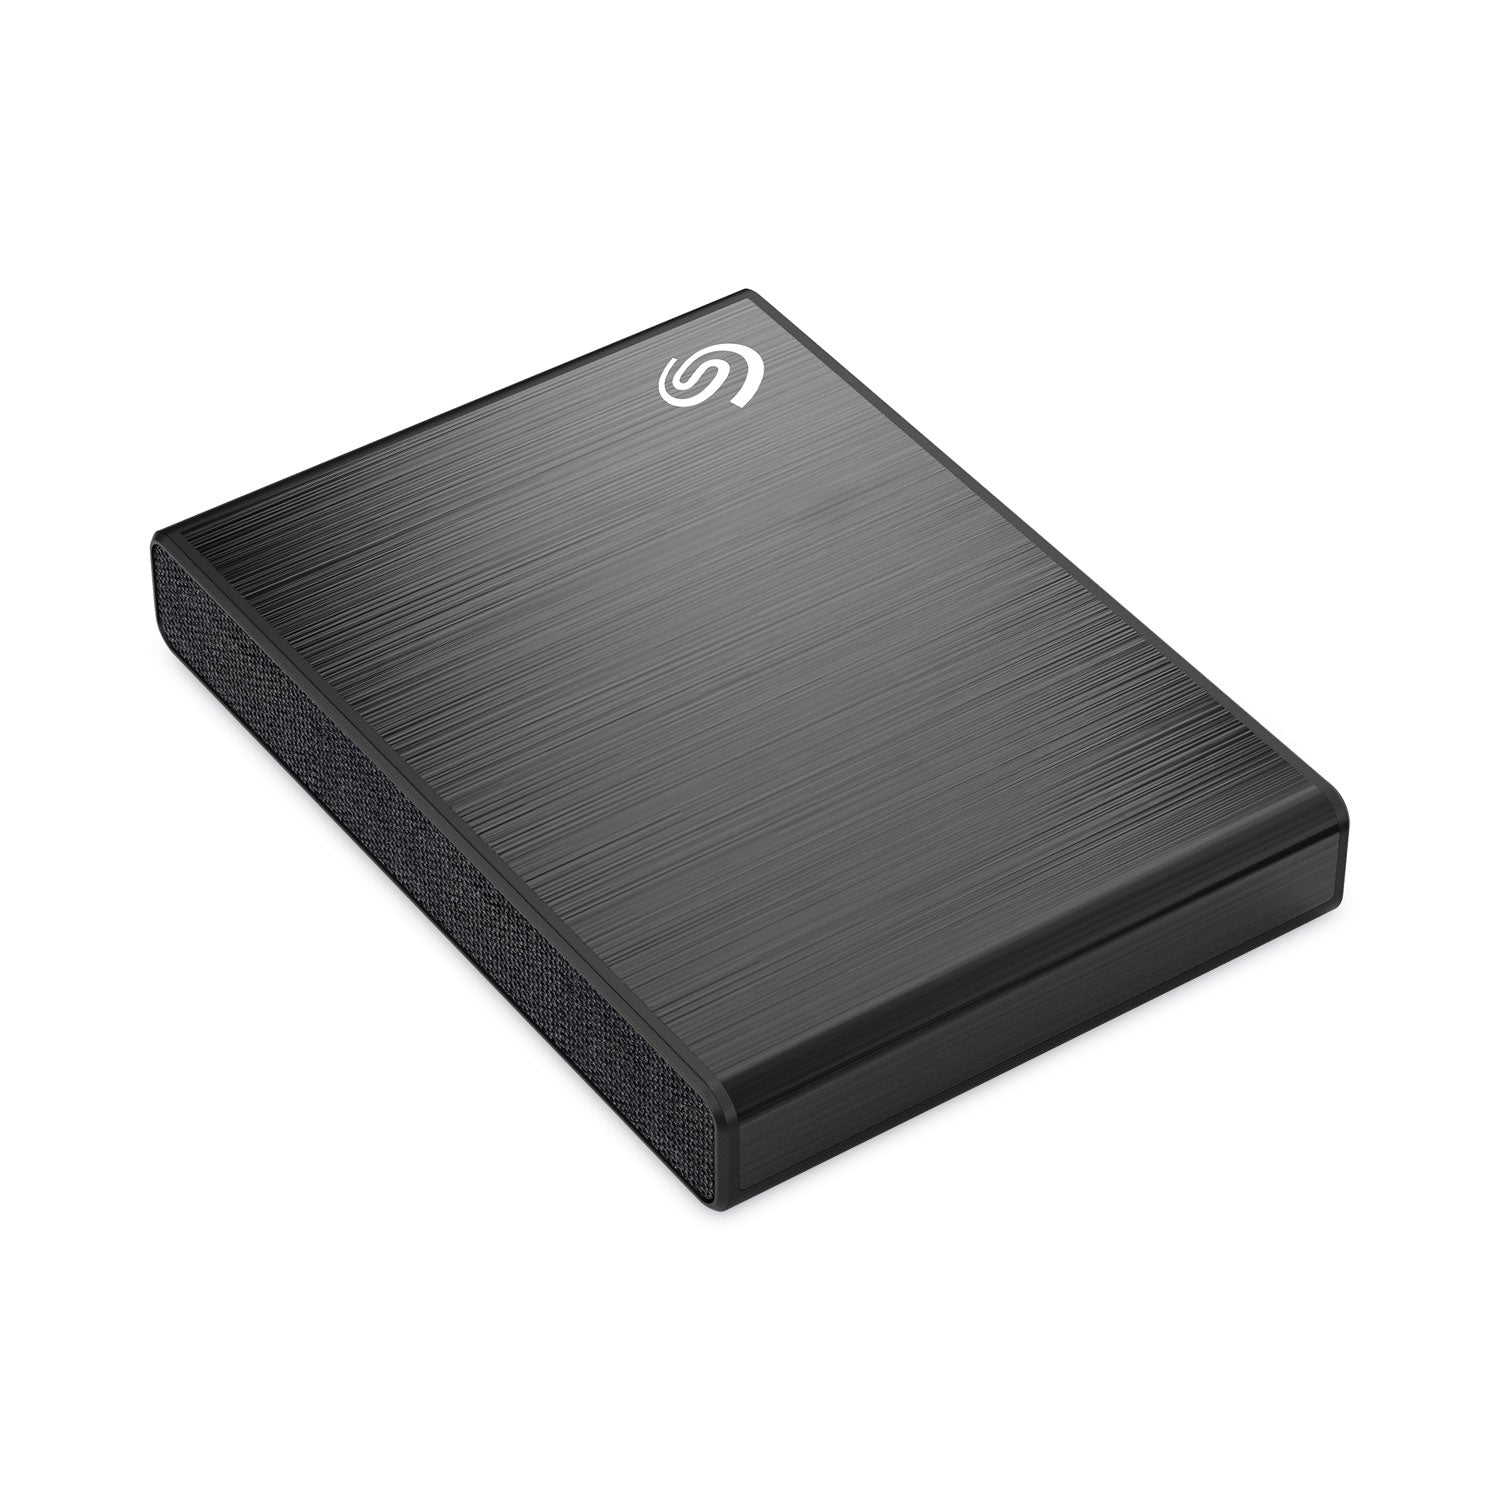 one-touch-external-solid-state-drive-1-tb-usb-30-black_sgtstkg1000400 - 3